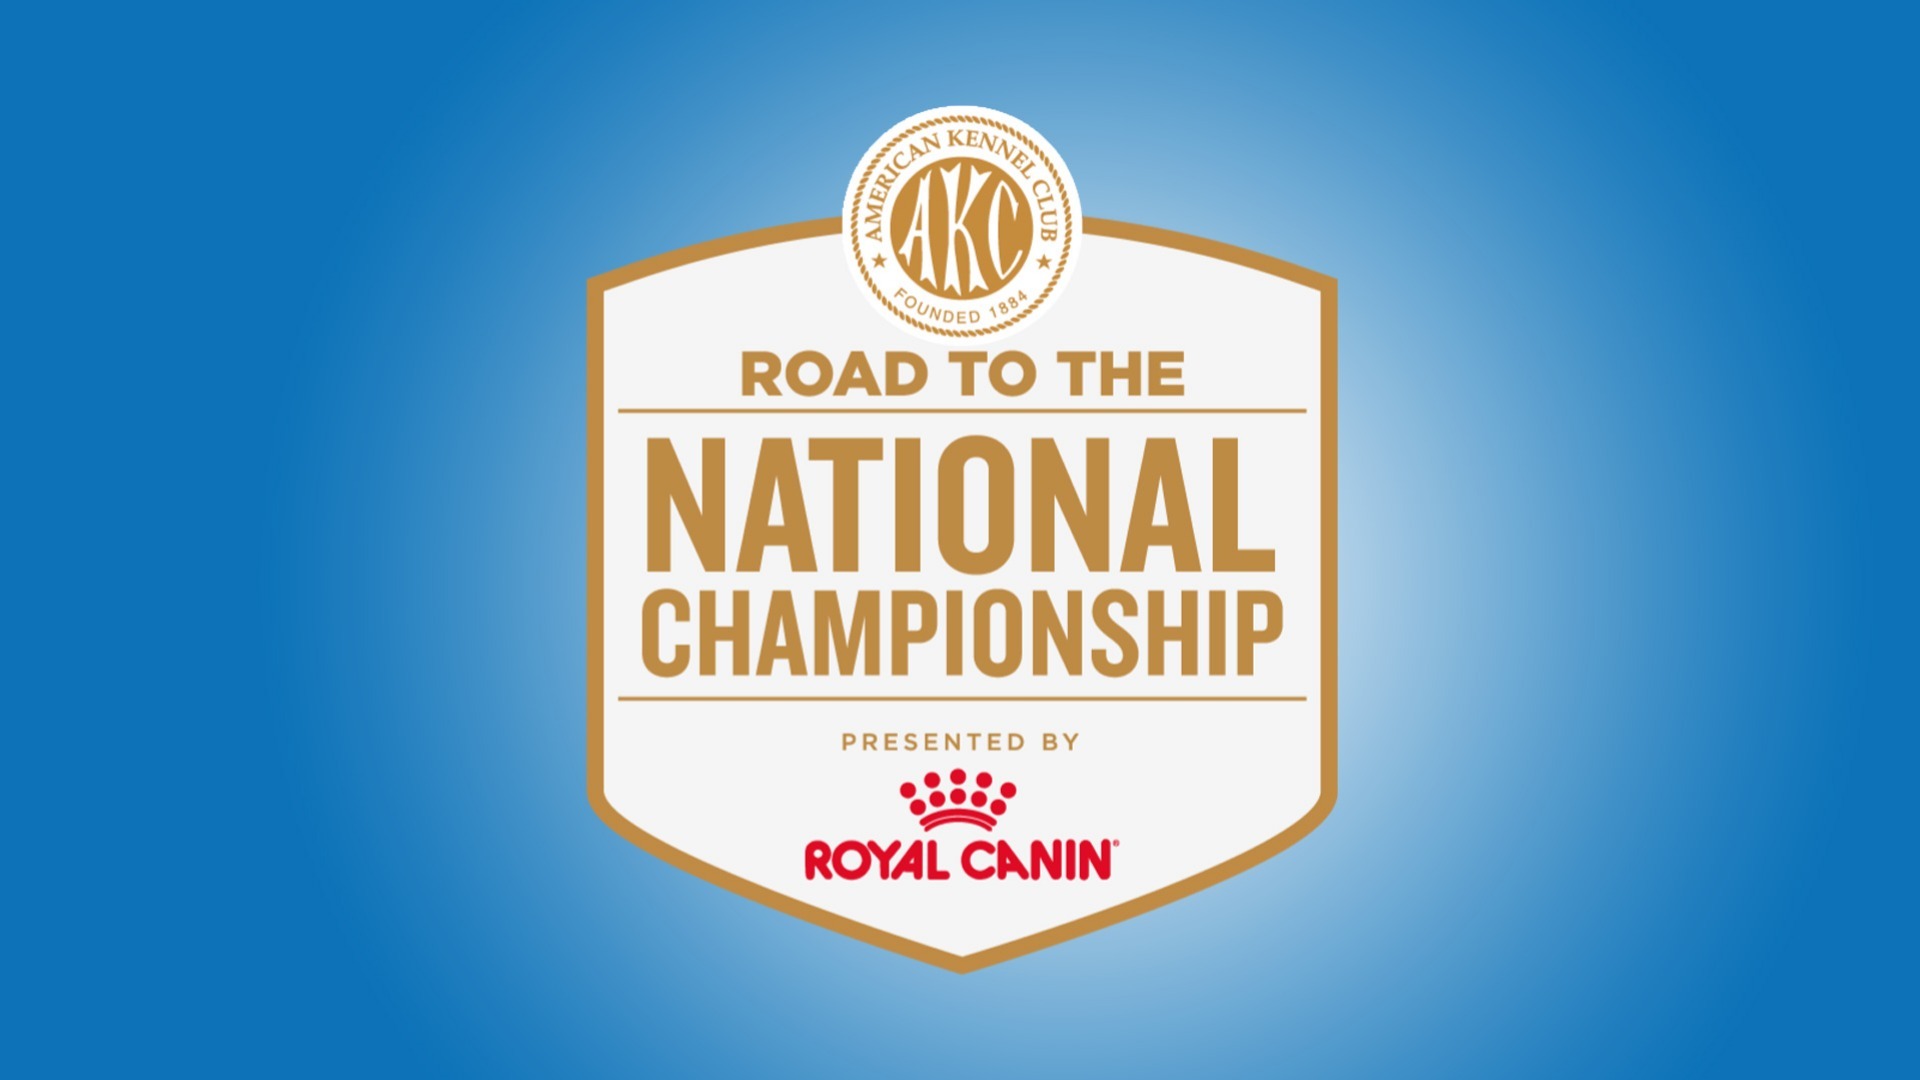 AKC.TV AKC Road To The National Championship Presented By Royal Canin